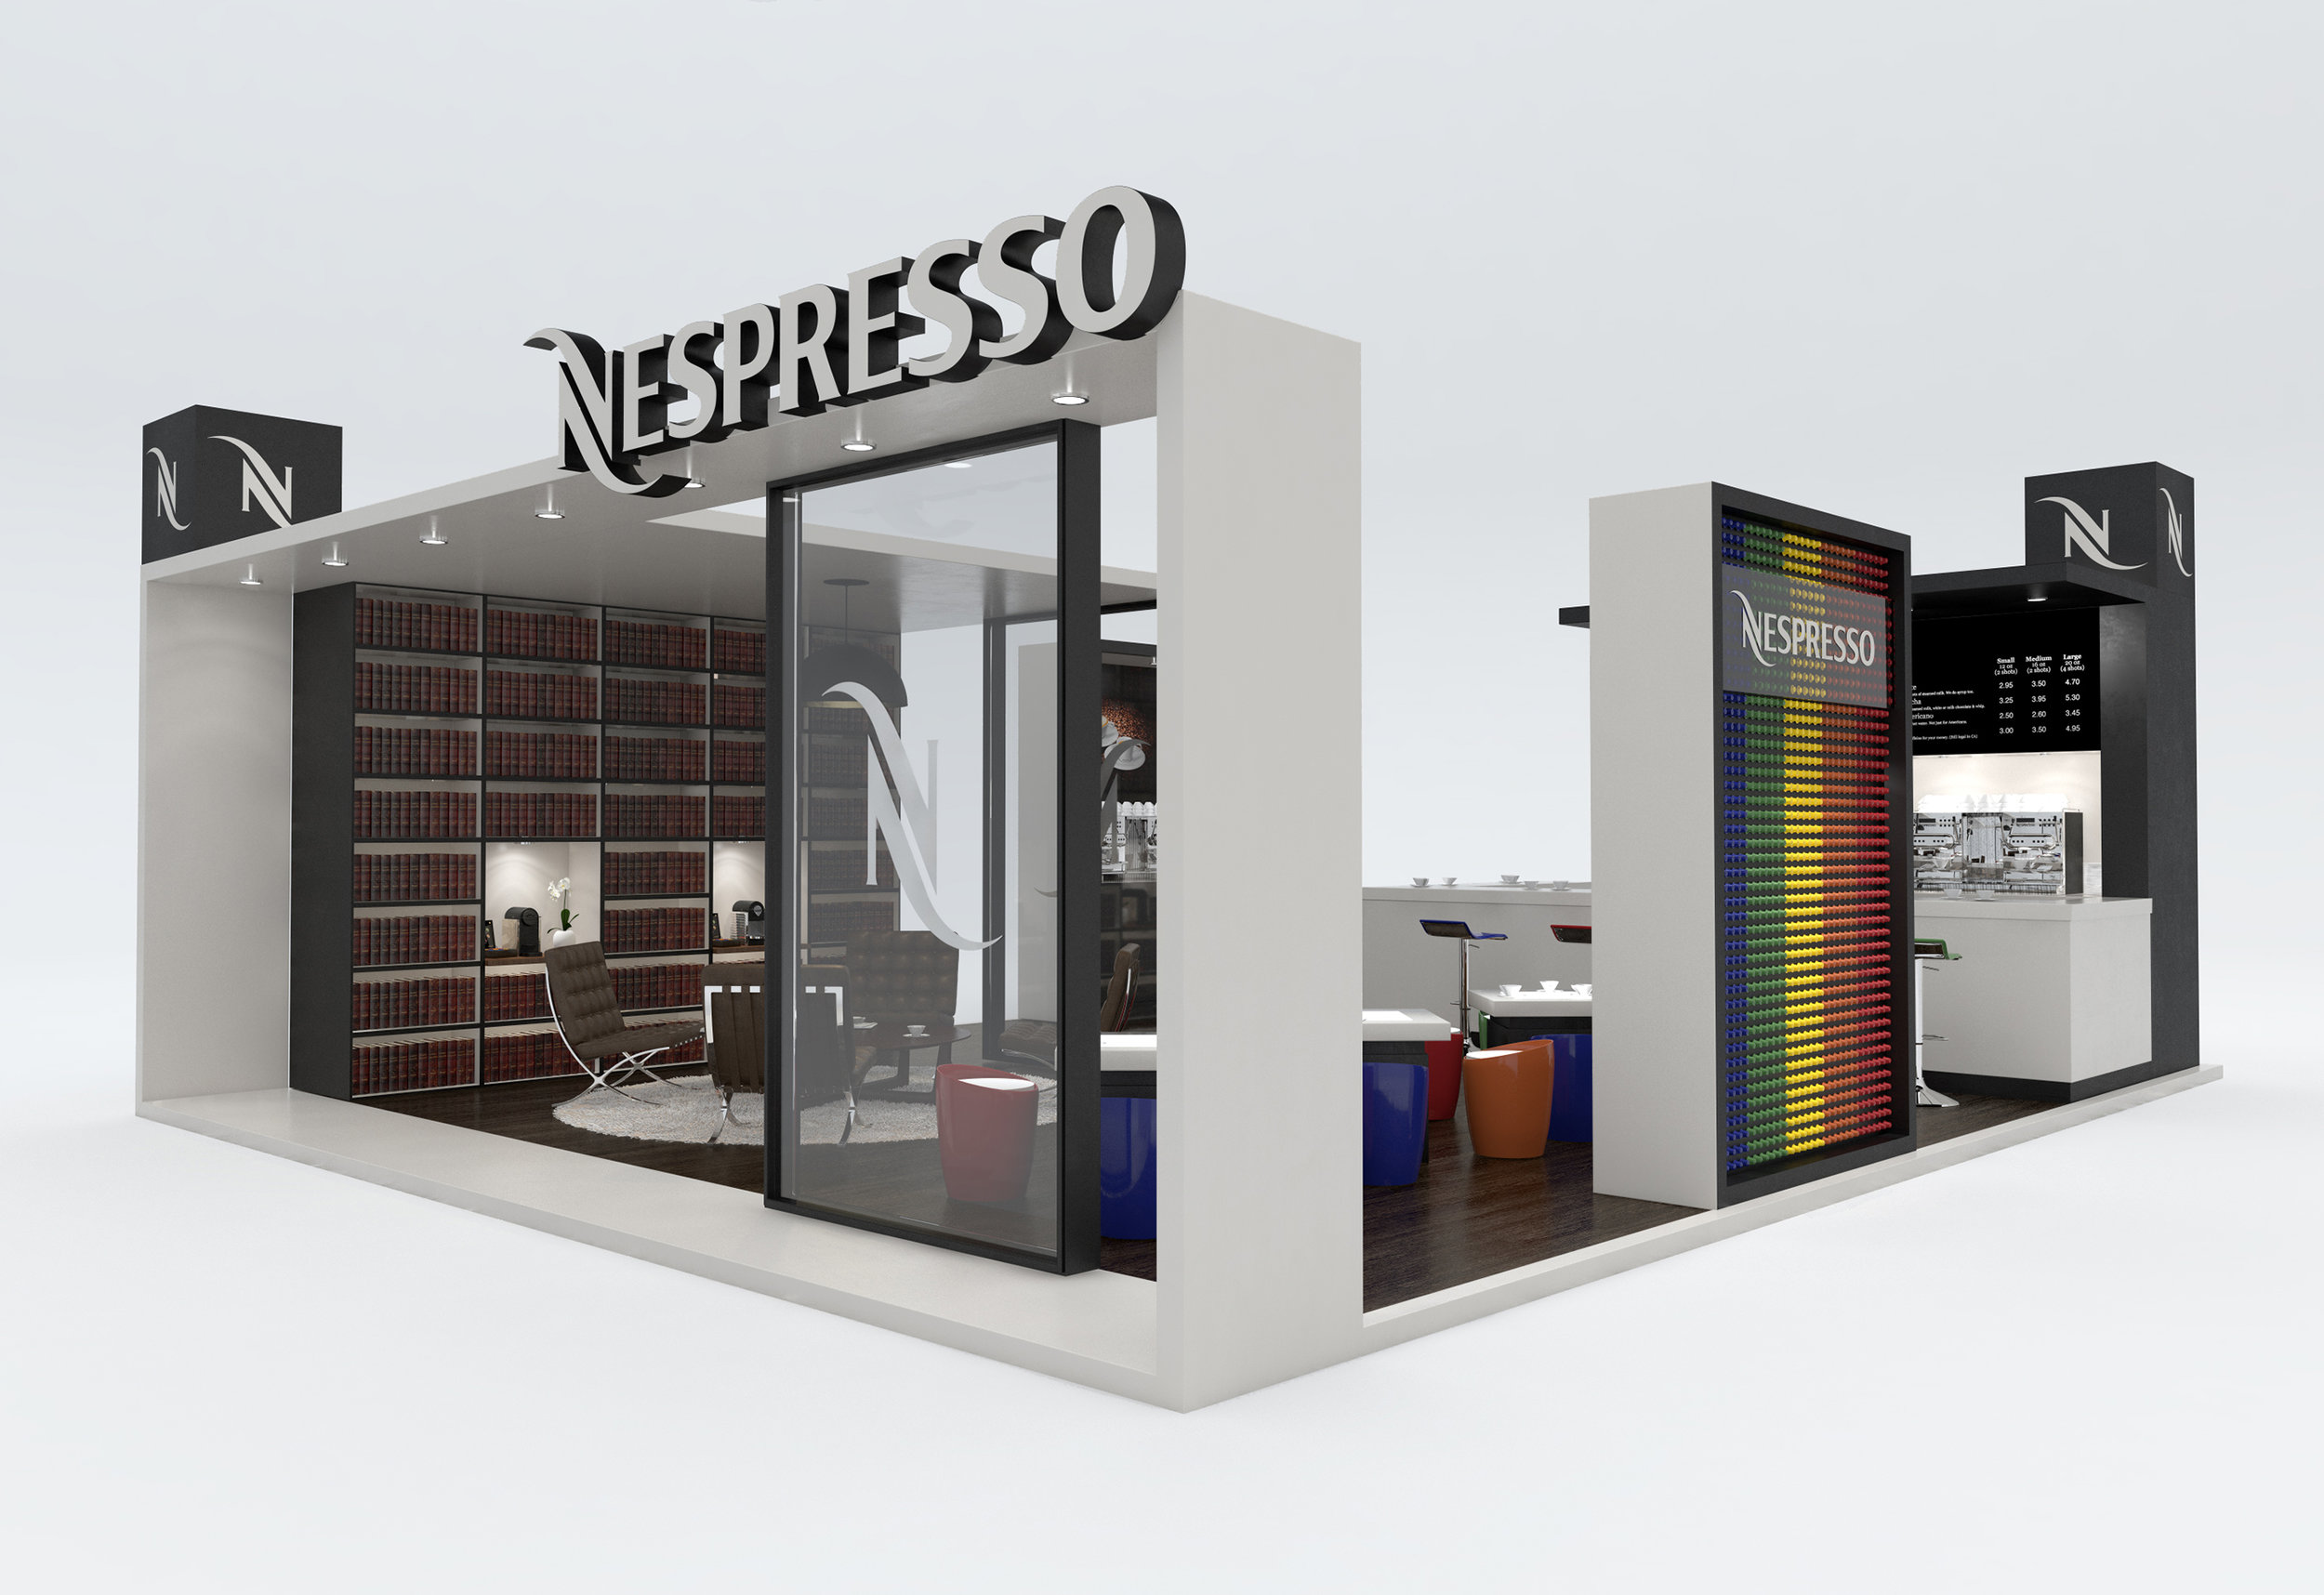 Aeroccino Nespresso to rent for events, fairs, exhibitions and stands.